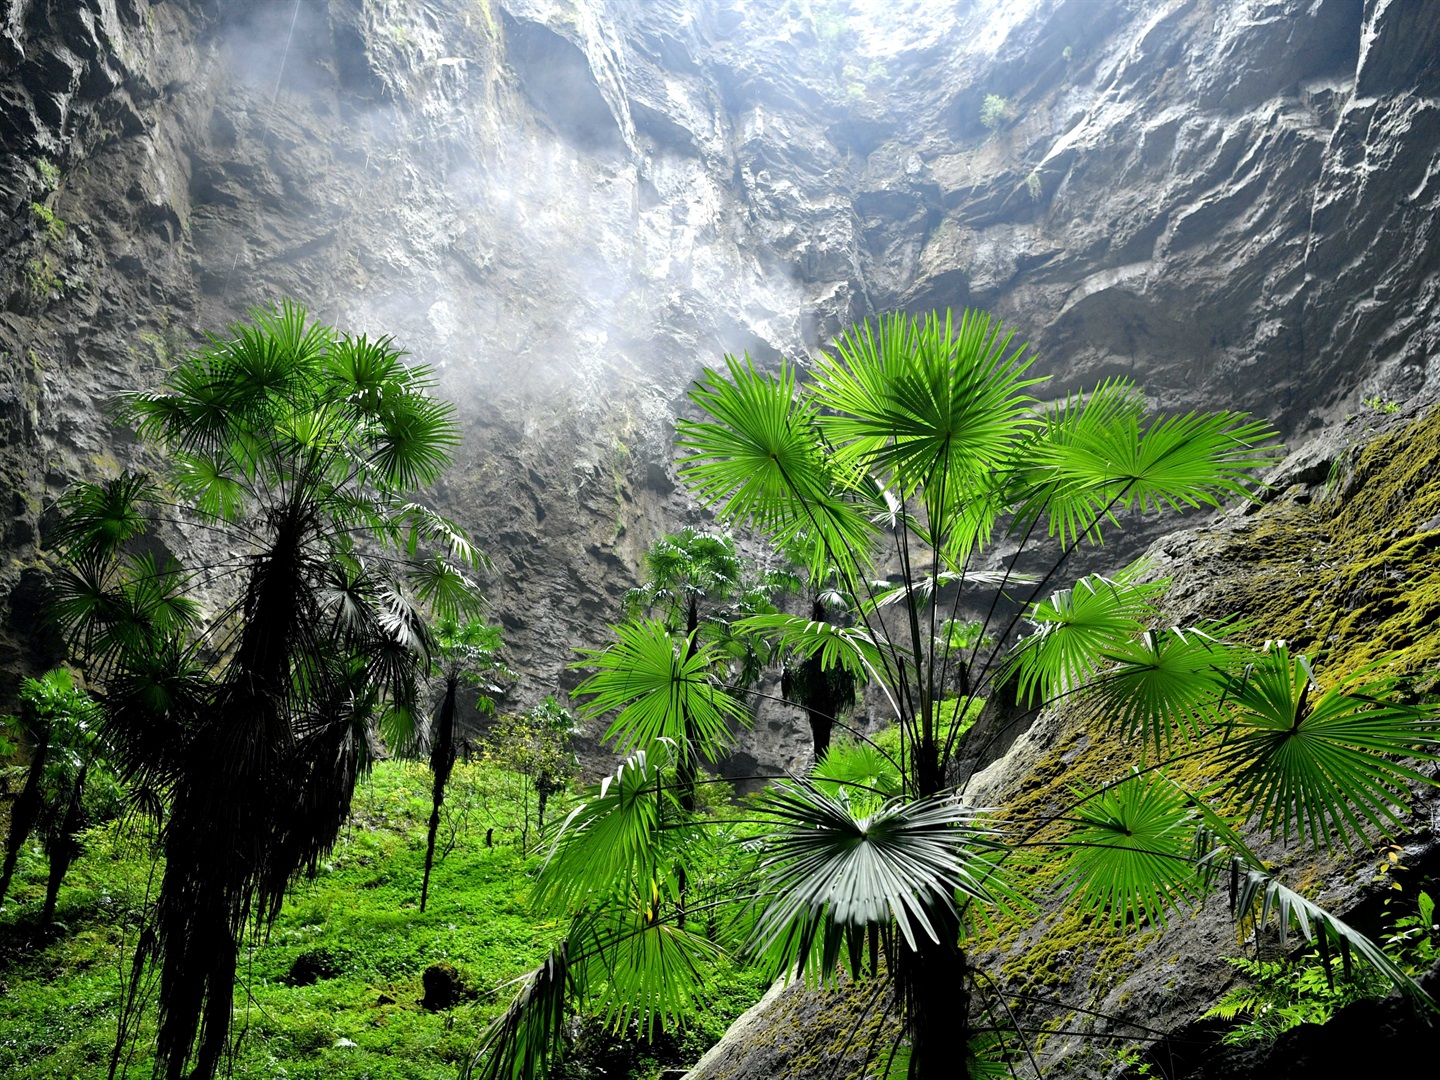 Trees in a Tiankeng, or giant karst sinkhole, in China. Song Wen/Xinhua via Getty Images